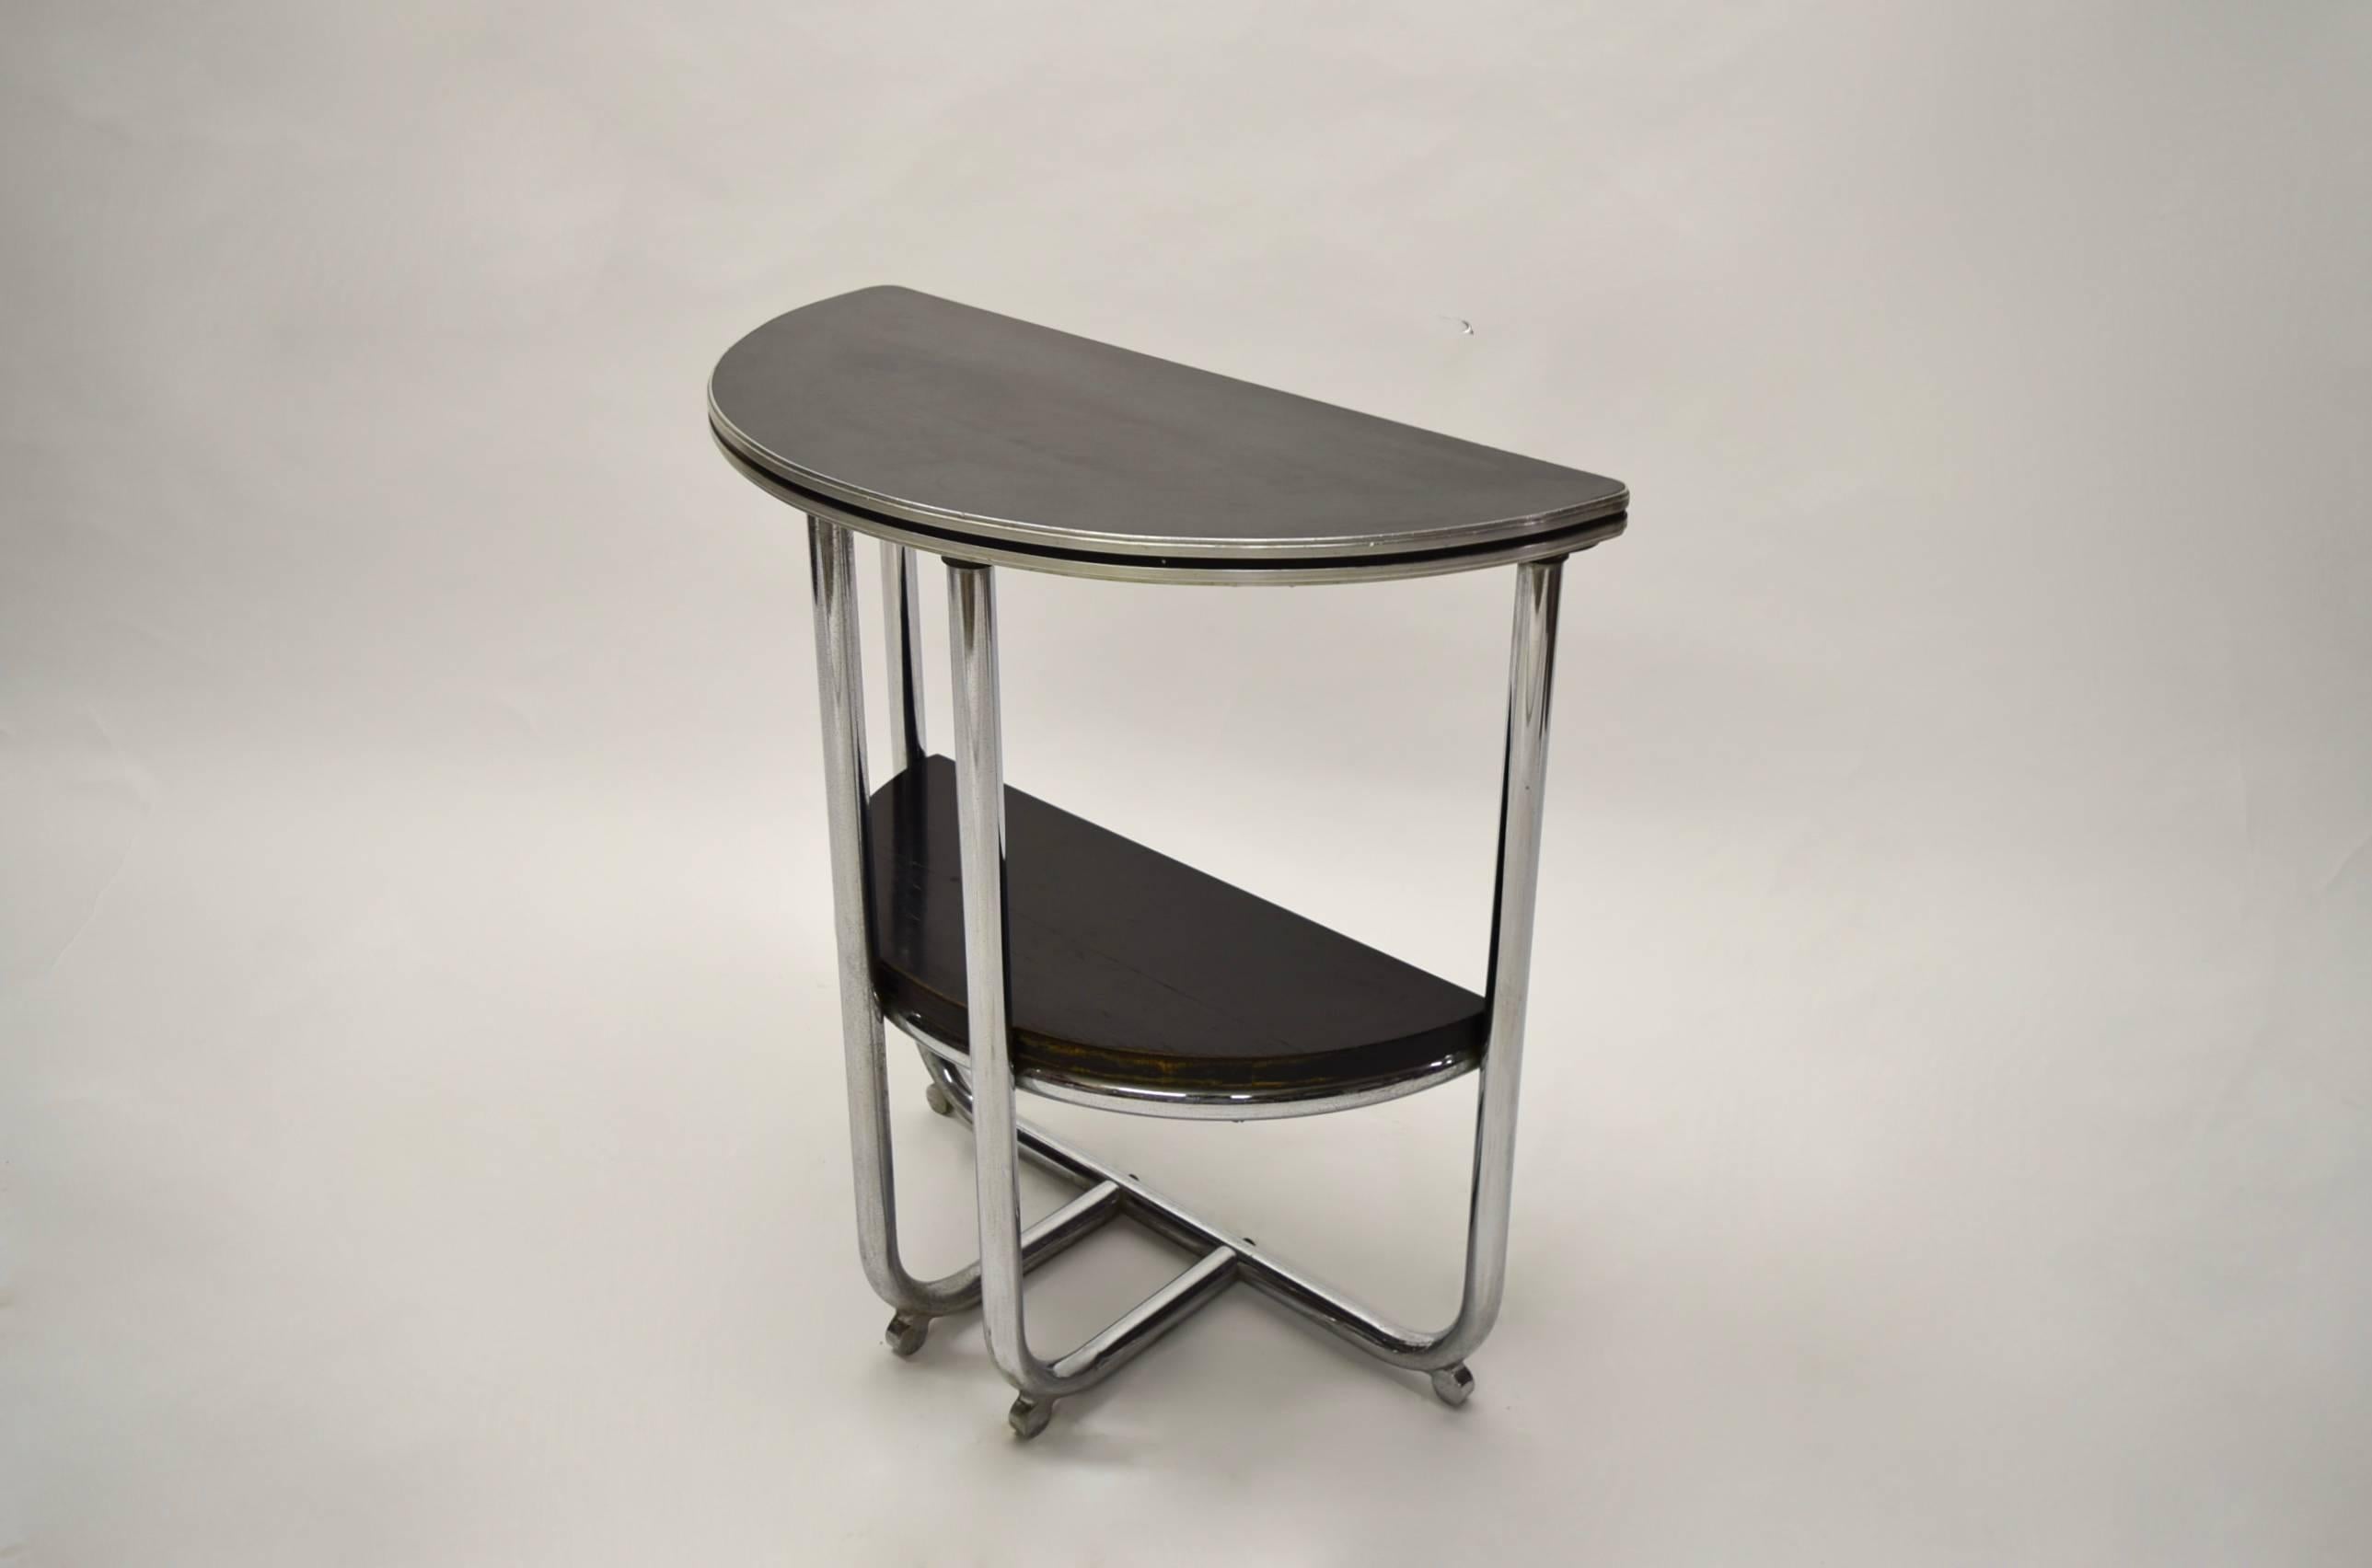 Demilune American Art Deco console table in tubular chromed metal, a black lacquered wood shelf, a black laminate top, and four round chromed feet.